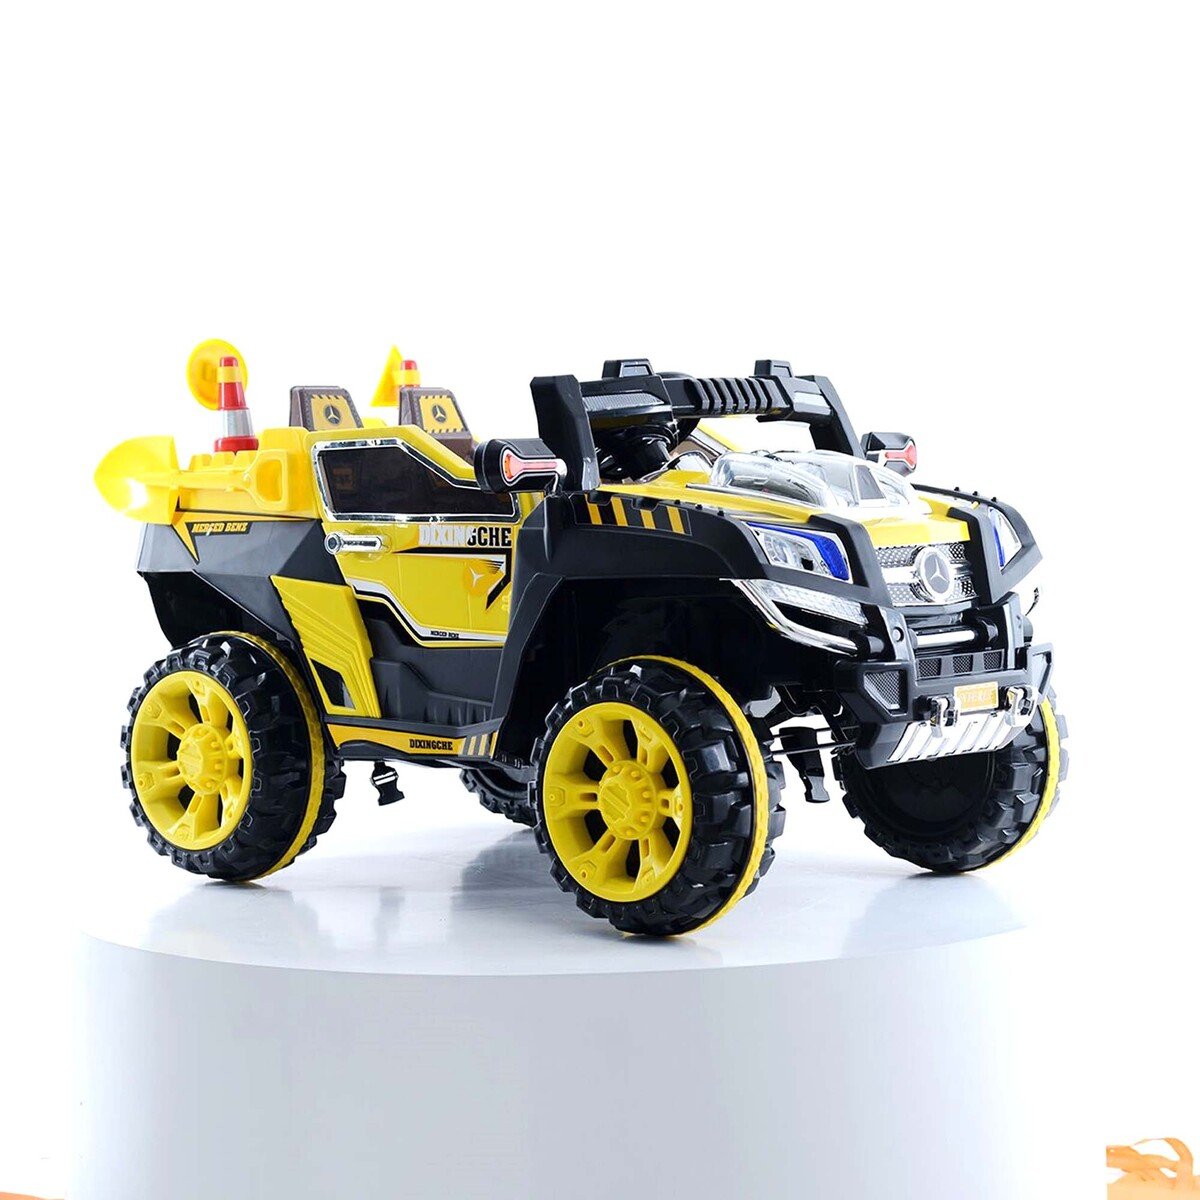 Skid Fusion Kids Battery Operated Motor Car NEL-803 Yellow